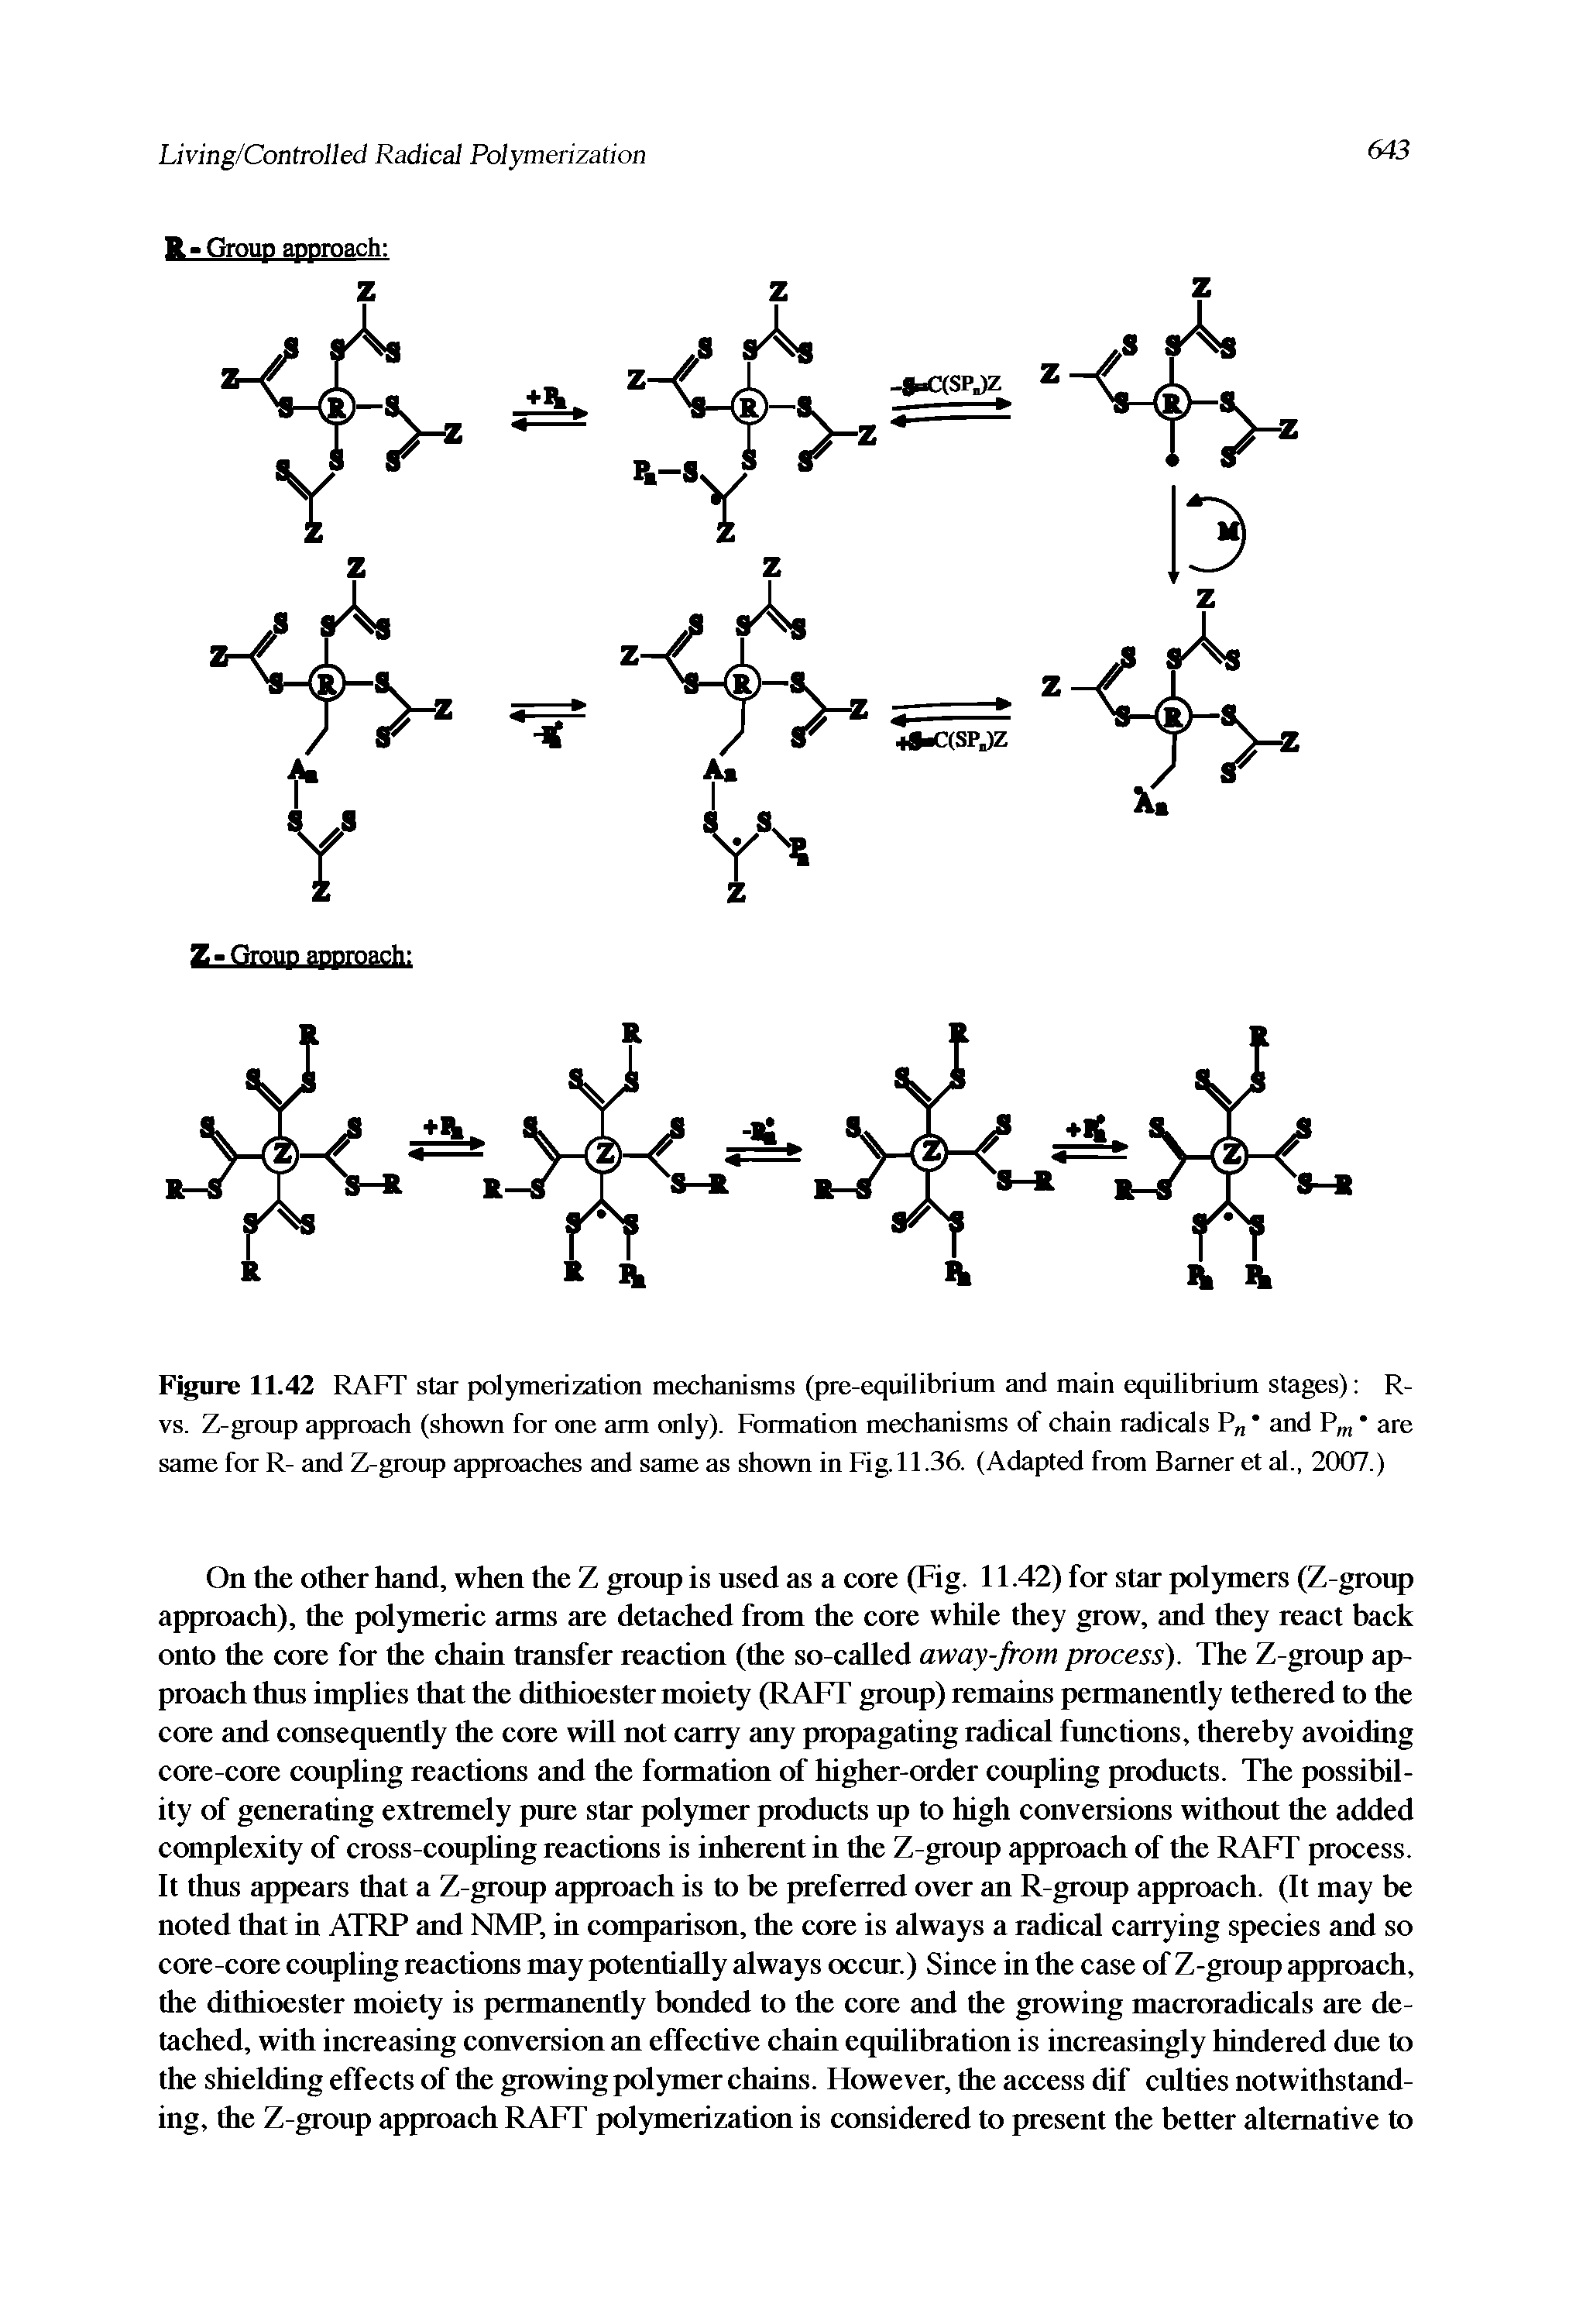 Figure 11.42 RAFT star polymerization mechanisms (pre-equilibrium and main equilibrium stages) R-vs. Z-group approach (shown for one arm only). Formation mechanisms of chain radicals P and are same for R- and Z-group approaches and same as shown in Fig.11.36. (Adapted from Earner et al., 2007.)...